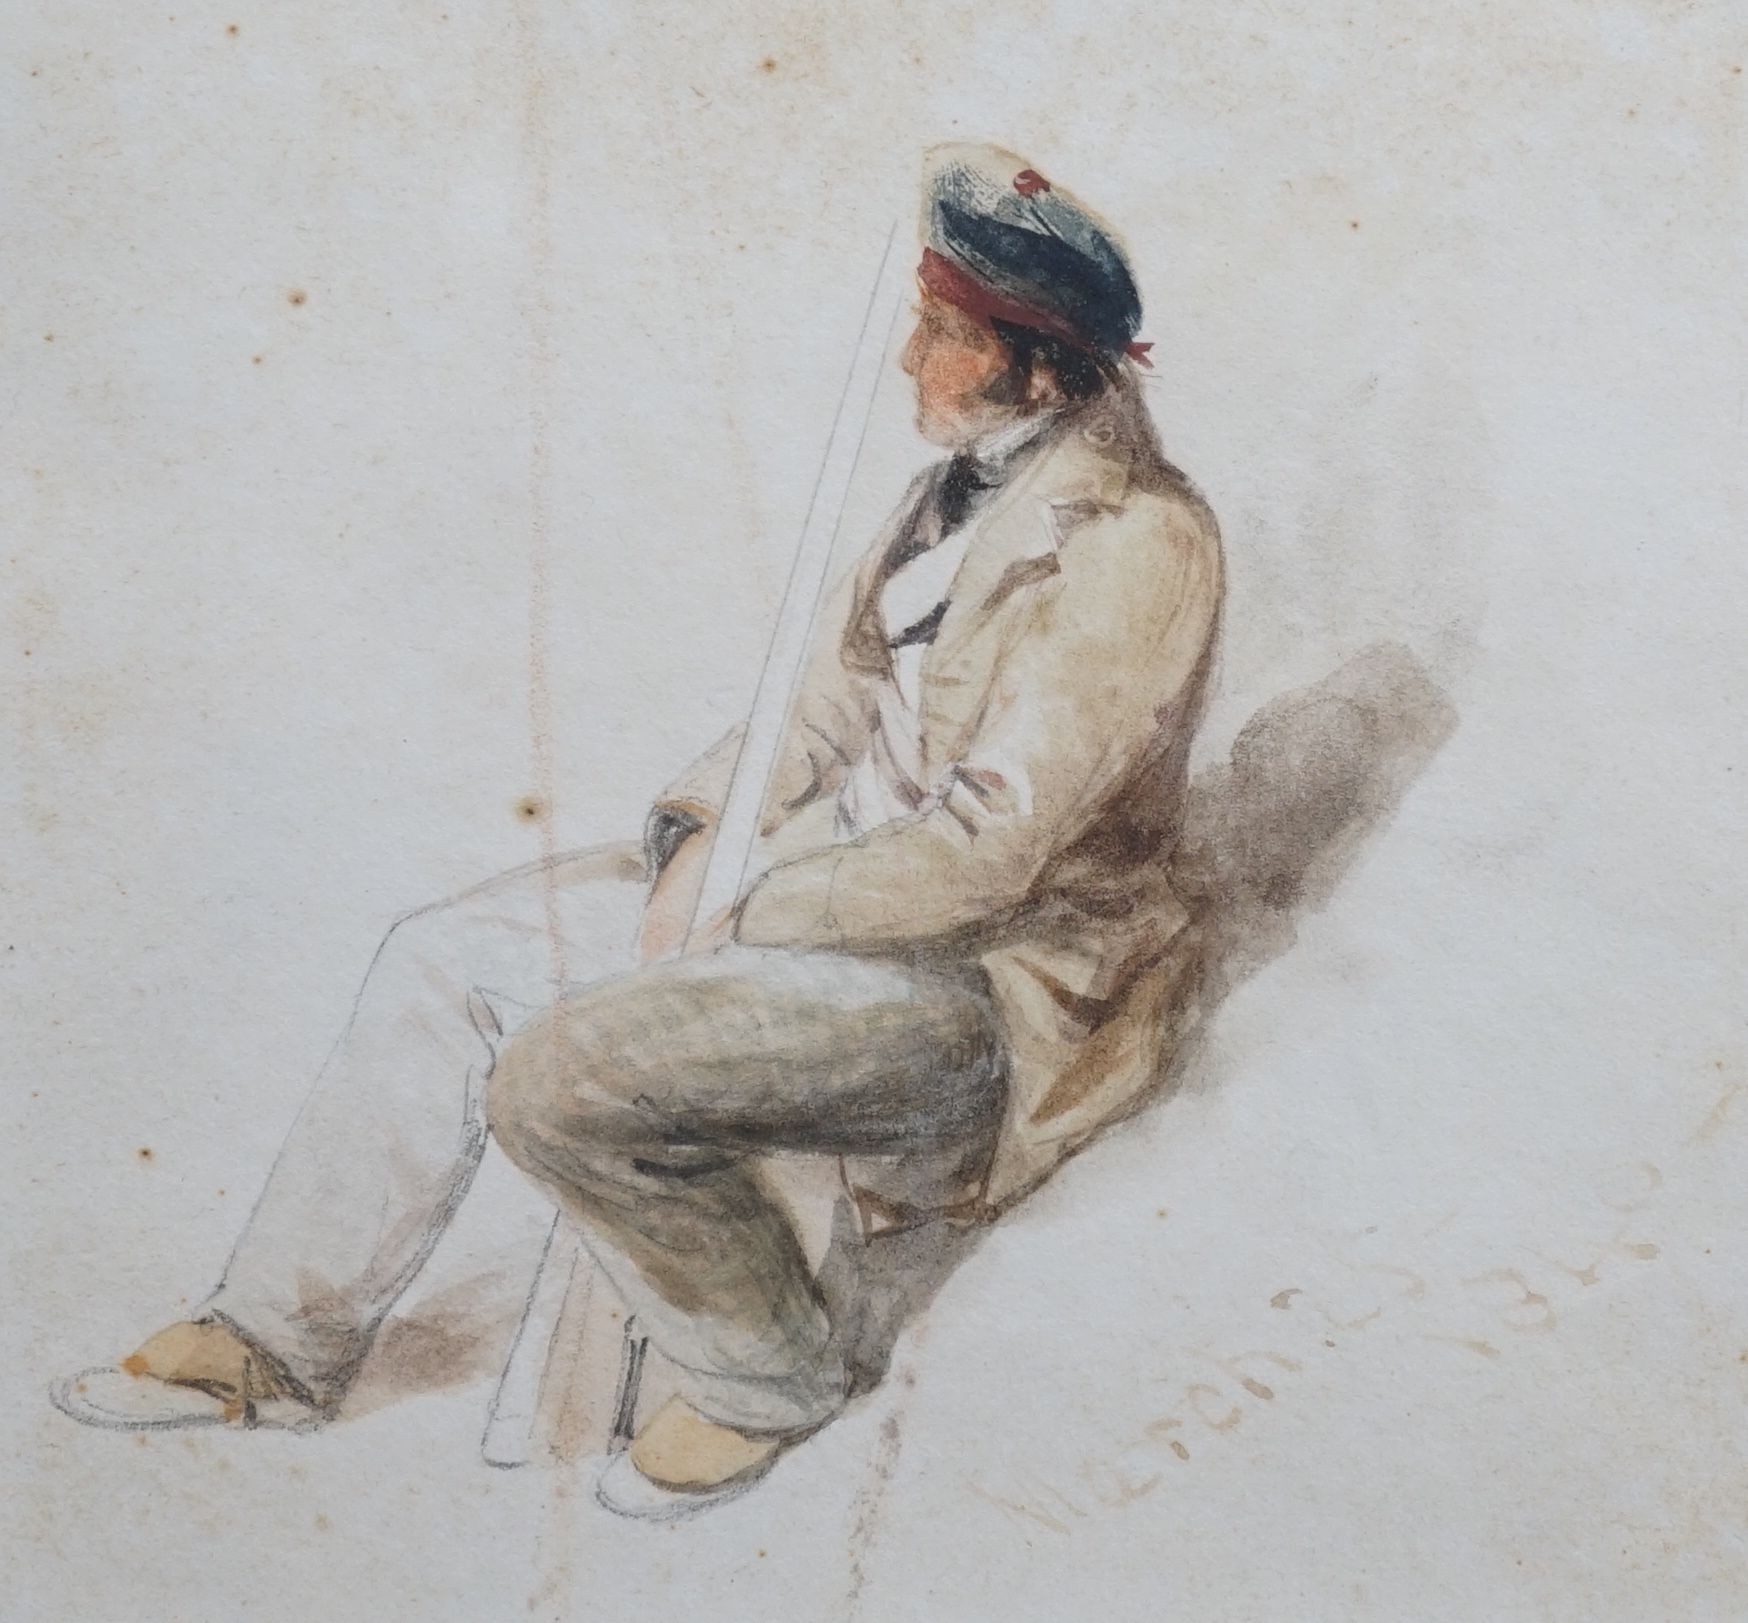 Thomas Miles Richardson Jnr, (1813-1890), Seated Scotsman with a gun, watercolour, inscribed 'March 25.1840', 12 x 12.5cm